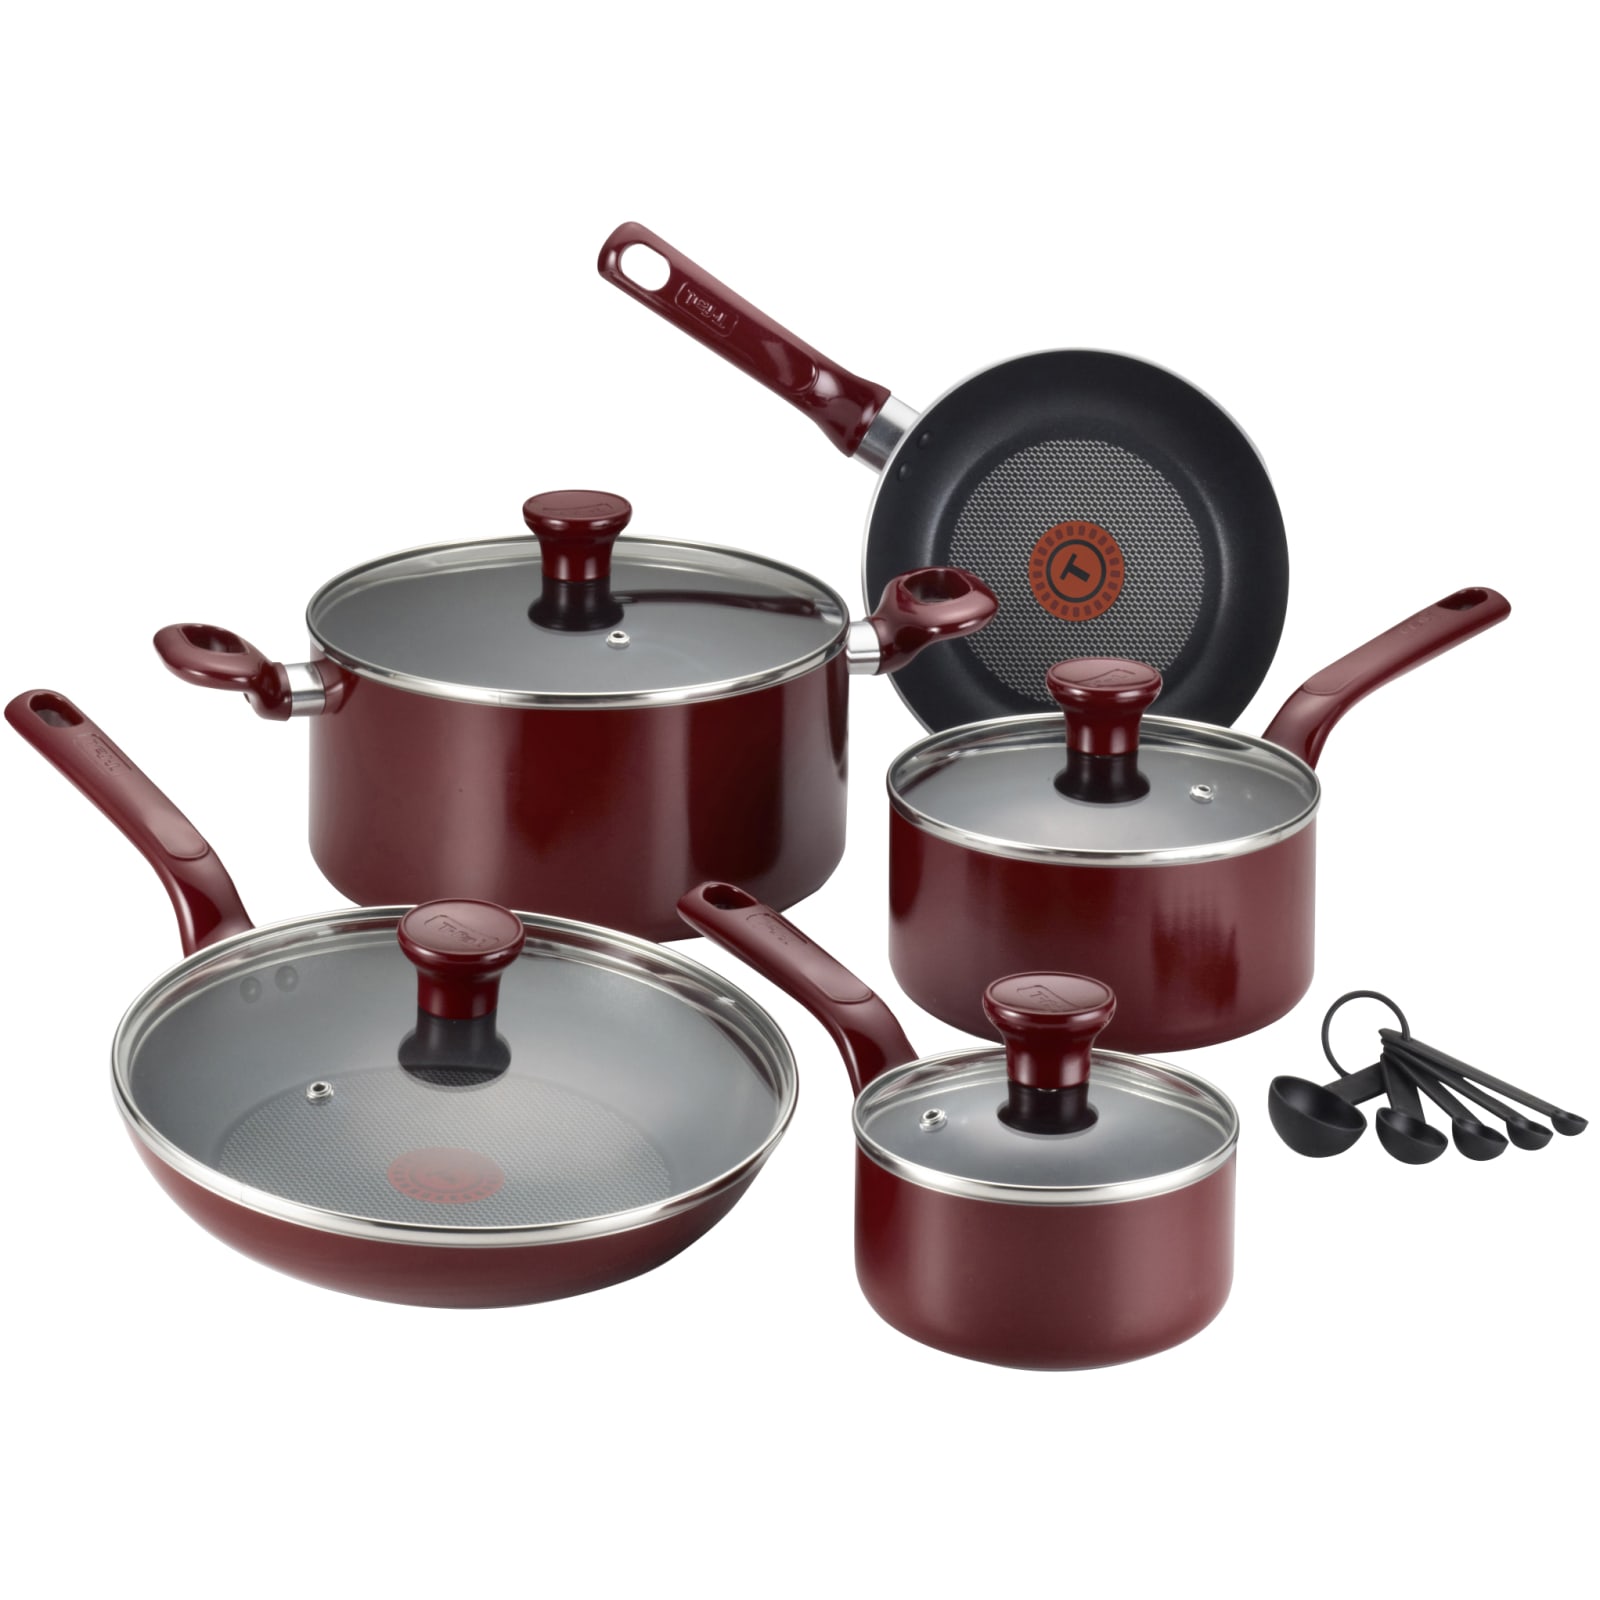 T-fal Easy Care Nonstick Cookware Set, 20 pc - Pick 'n Save